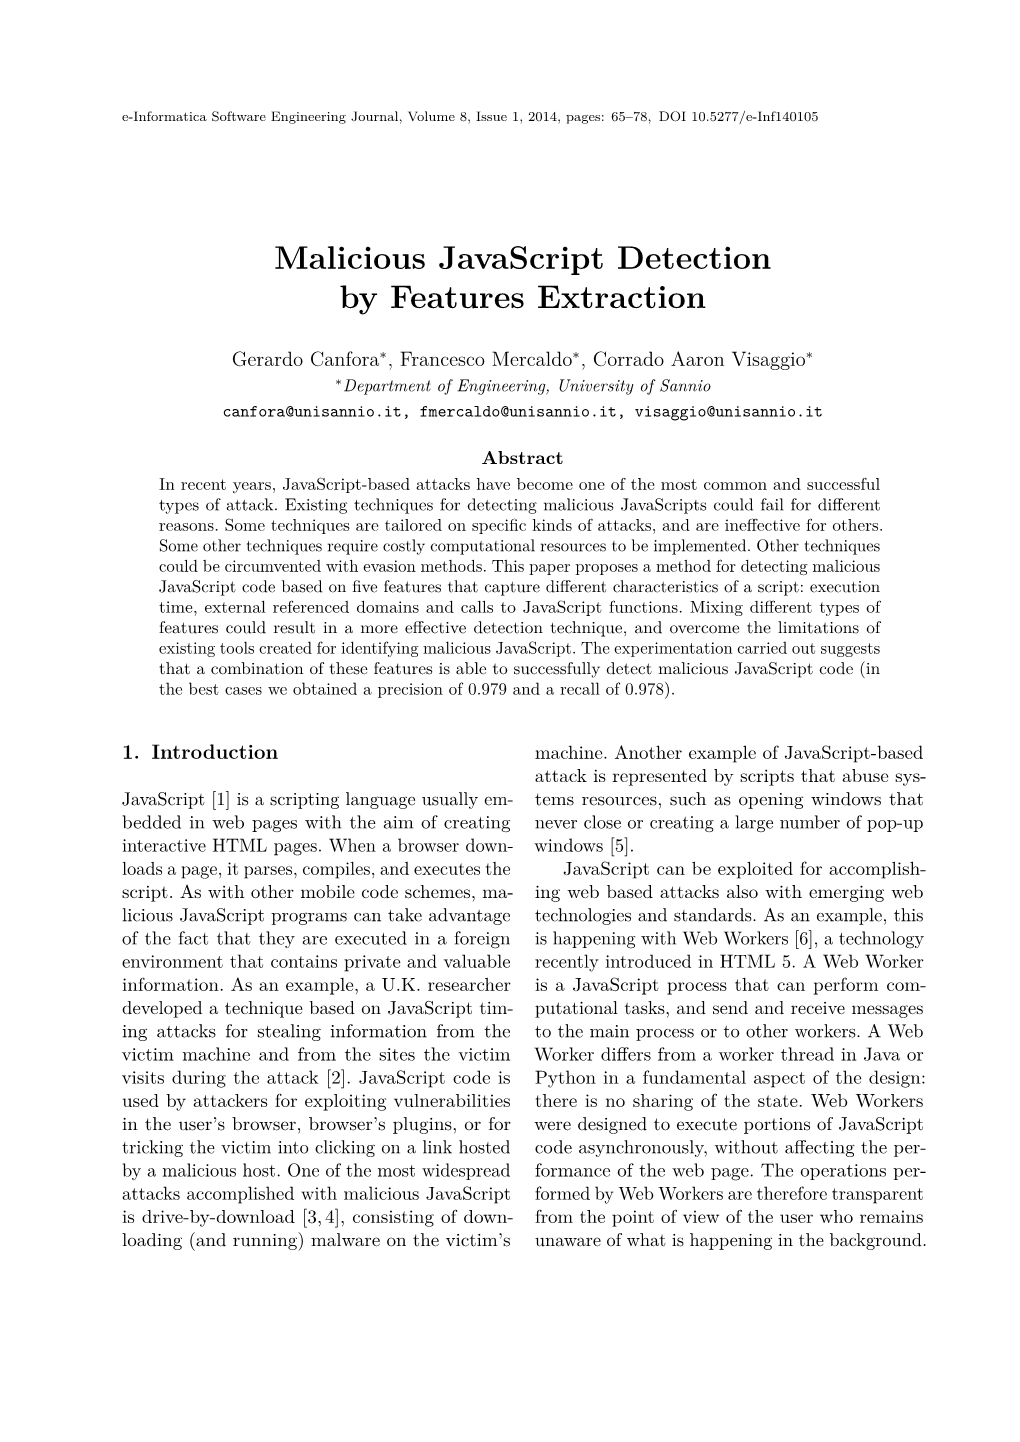 Malicious Javascript Detection by Features Extraction